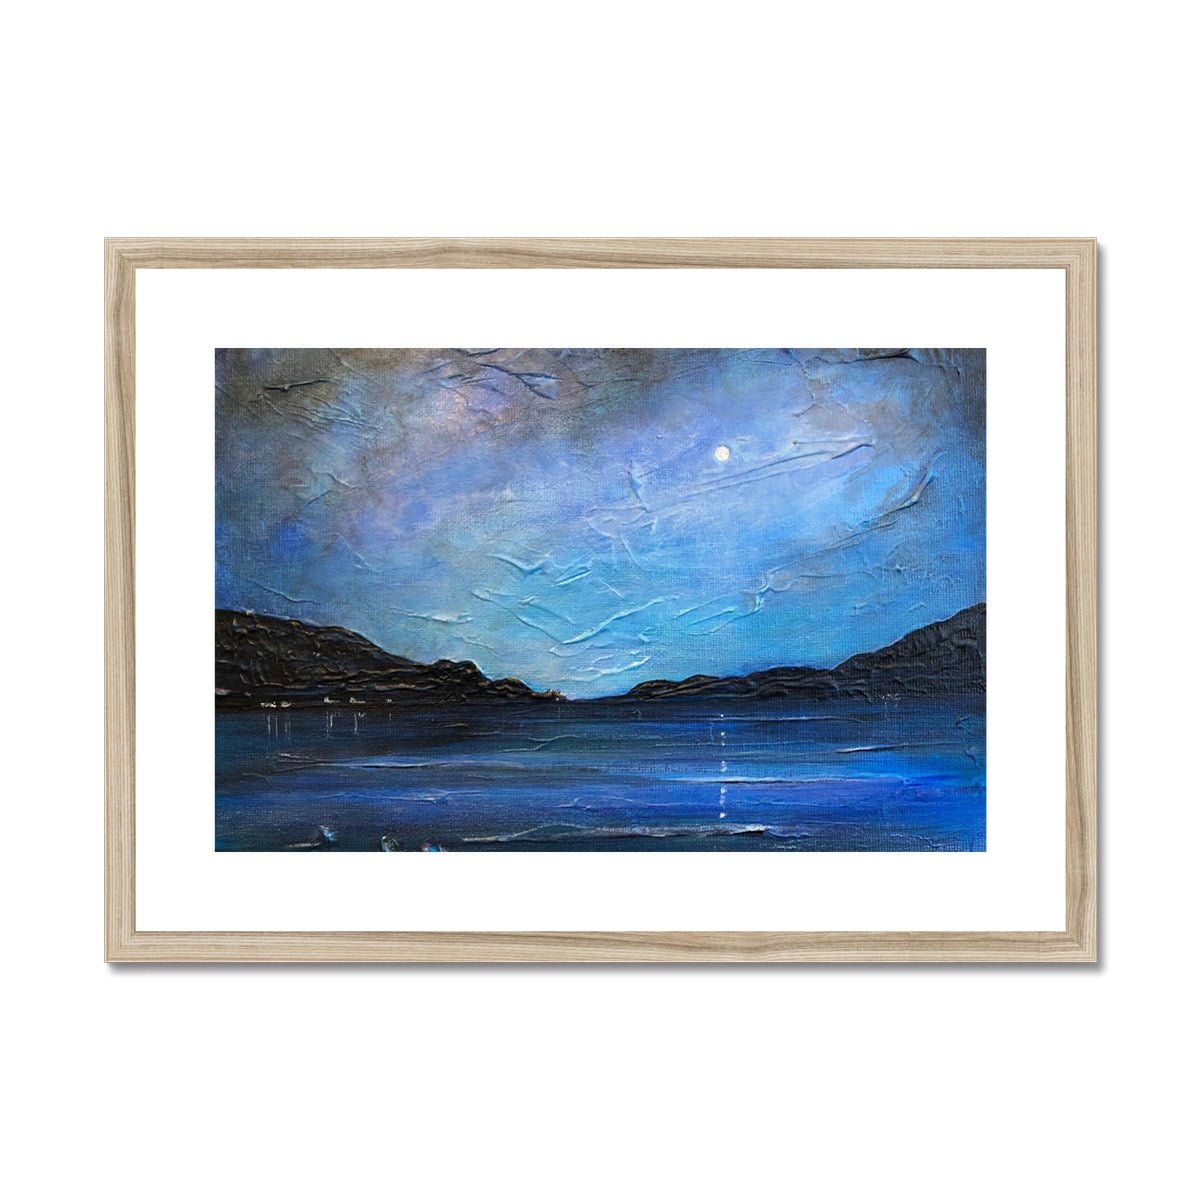 Loch Ness Moonlight Painting | Framed & Mounted Prints From Scotland-Framed & Mounted Prints-Scottish Lochs & Mountains Art Gallery-A2 Landscape-Natural Frame-Paintings, Prints, Homeware, Art Gifts From Scotland By Scottish Artist Kevin Hunter